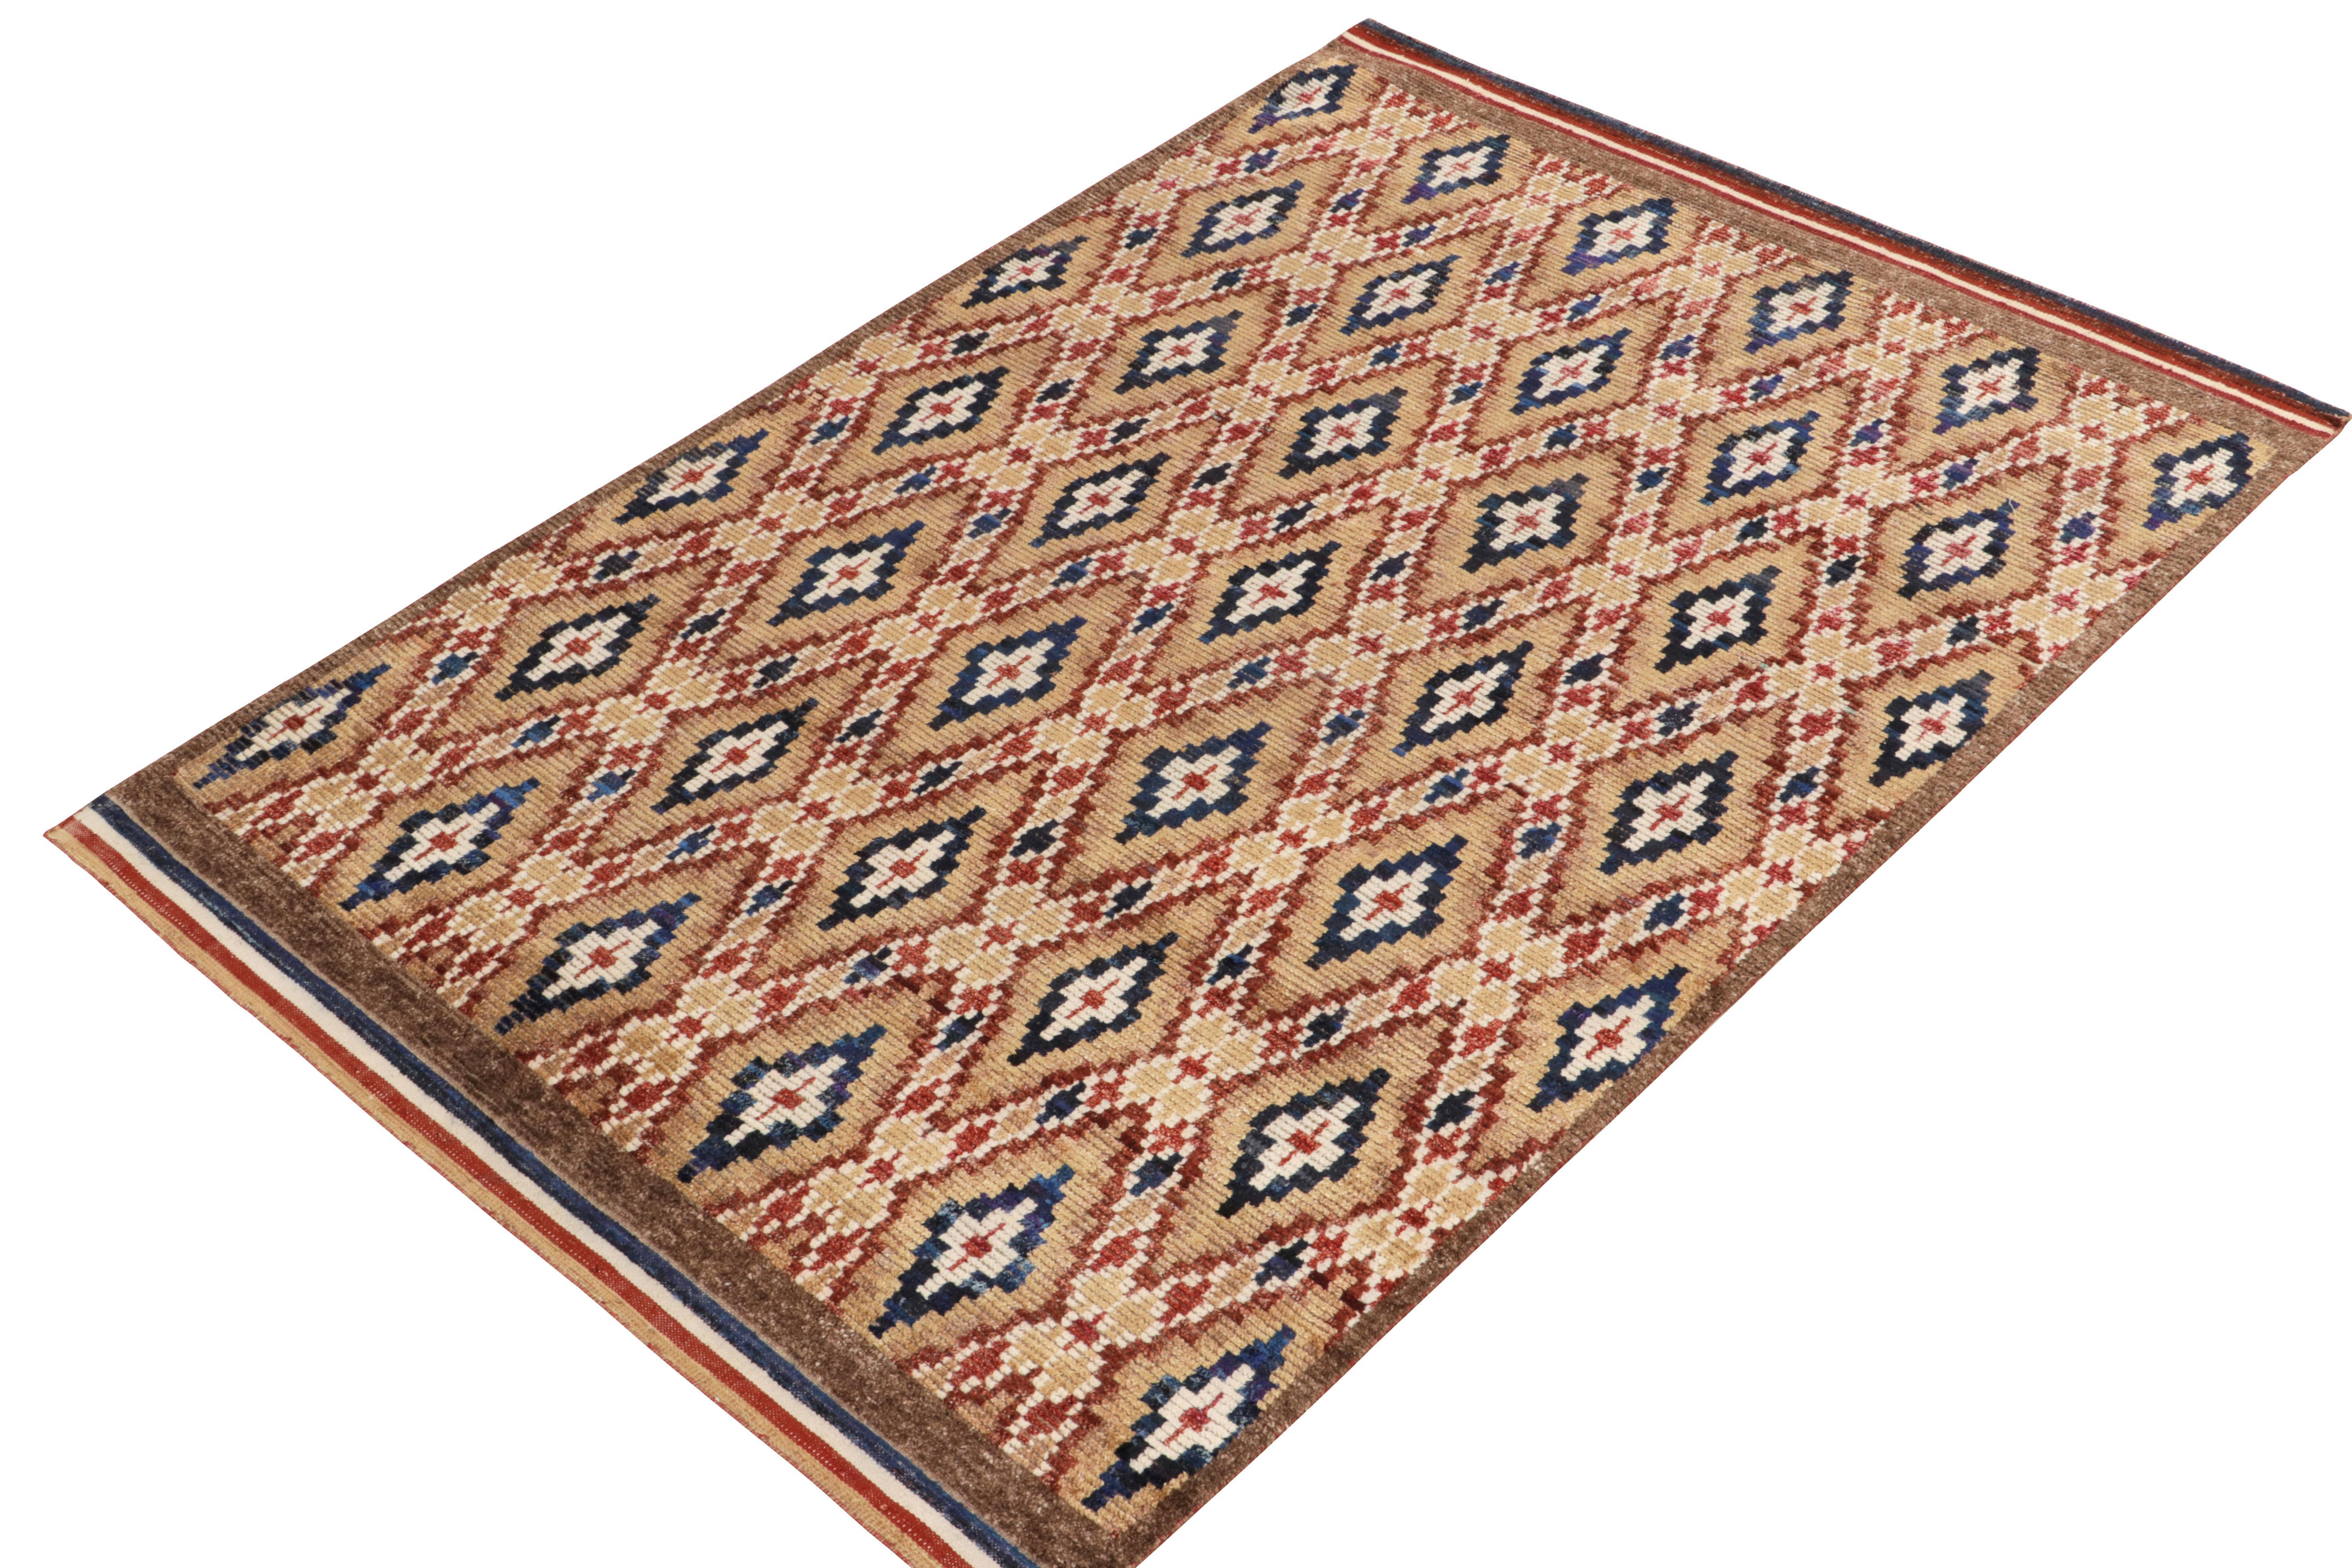 Tribal Rug & Kilim's Moroccan Style Rug in Beige-Brown, Red and Blue Diamond Patterns For Sale